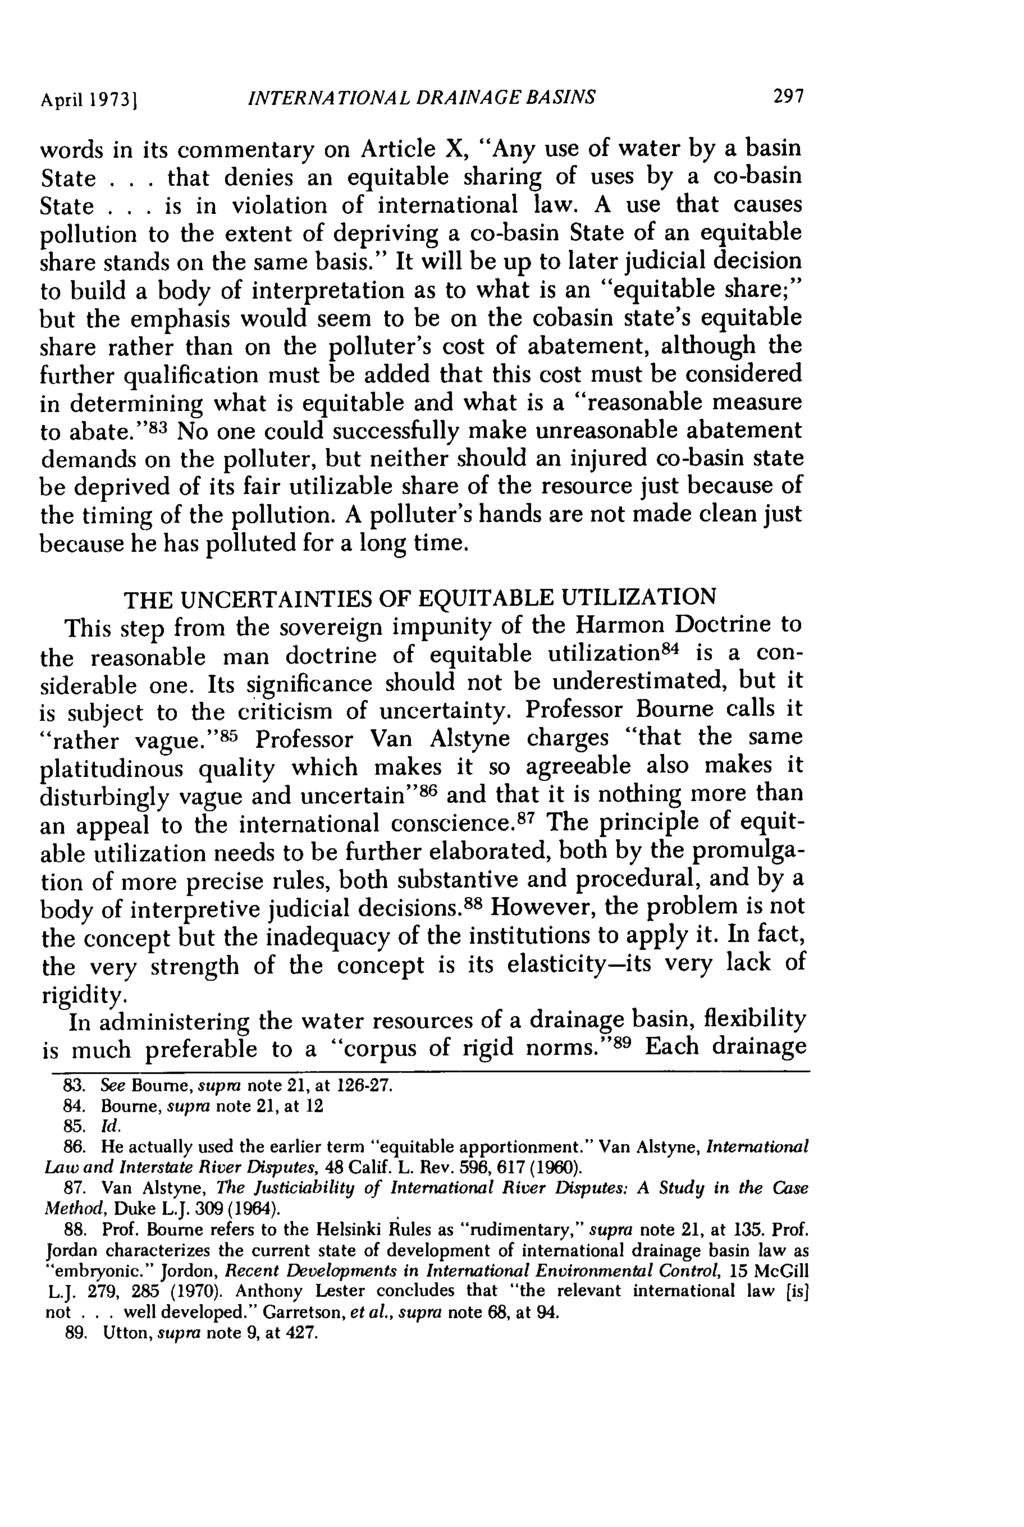 April 19731 INTERNATIONAL DRAINAGE BASINS words in its commentary on Article X, "Any use of water by a basin State... that denies an equitable sharing of uses by a co-basin State.